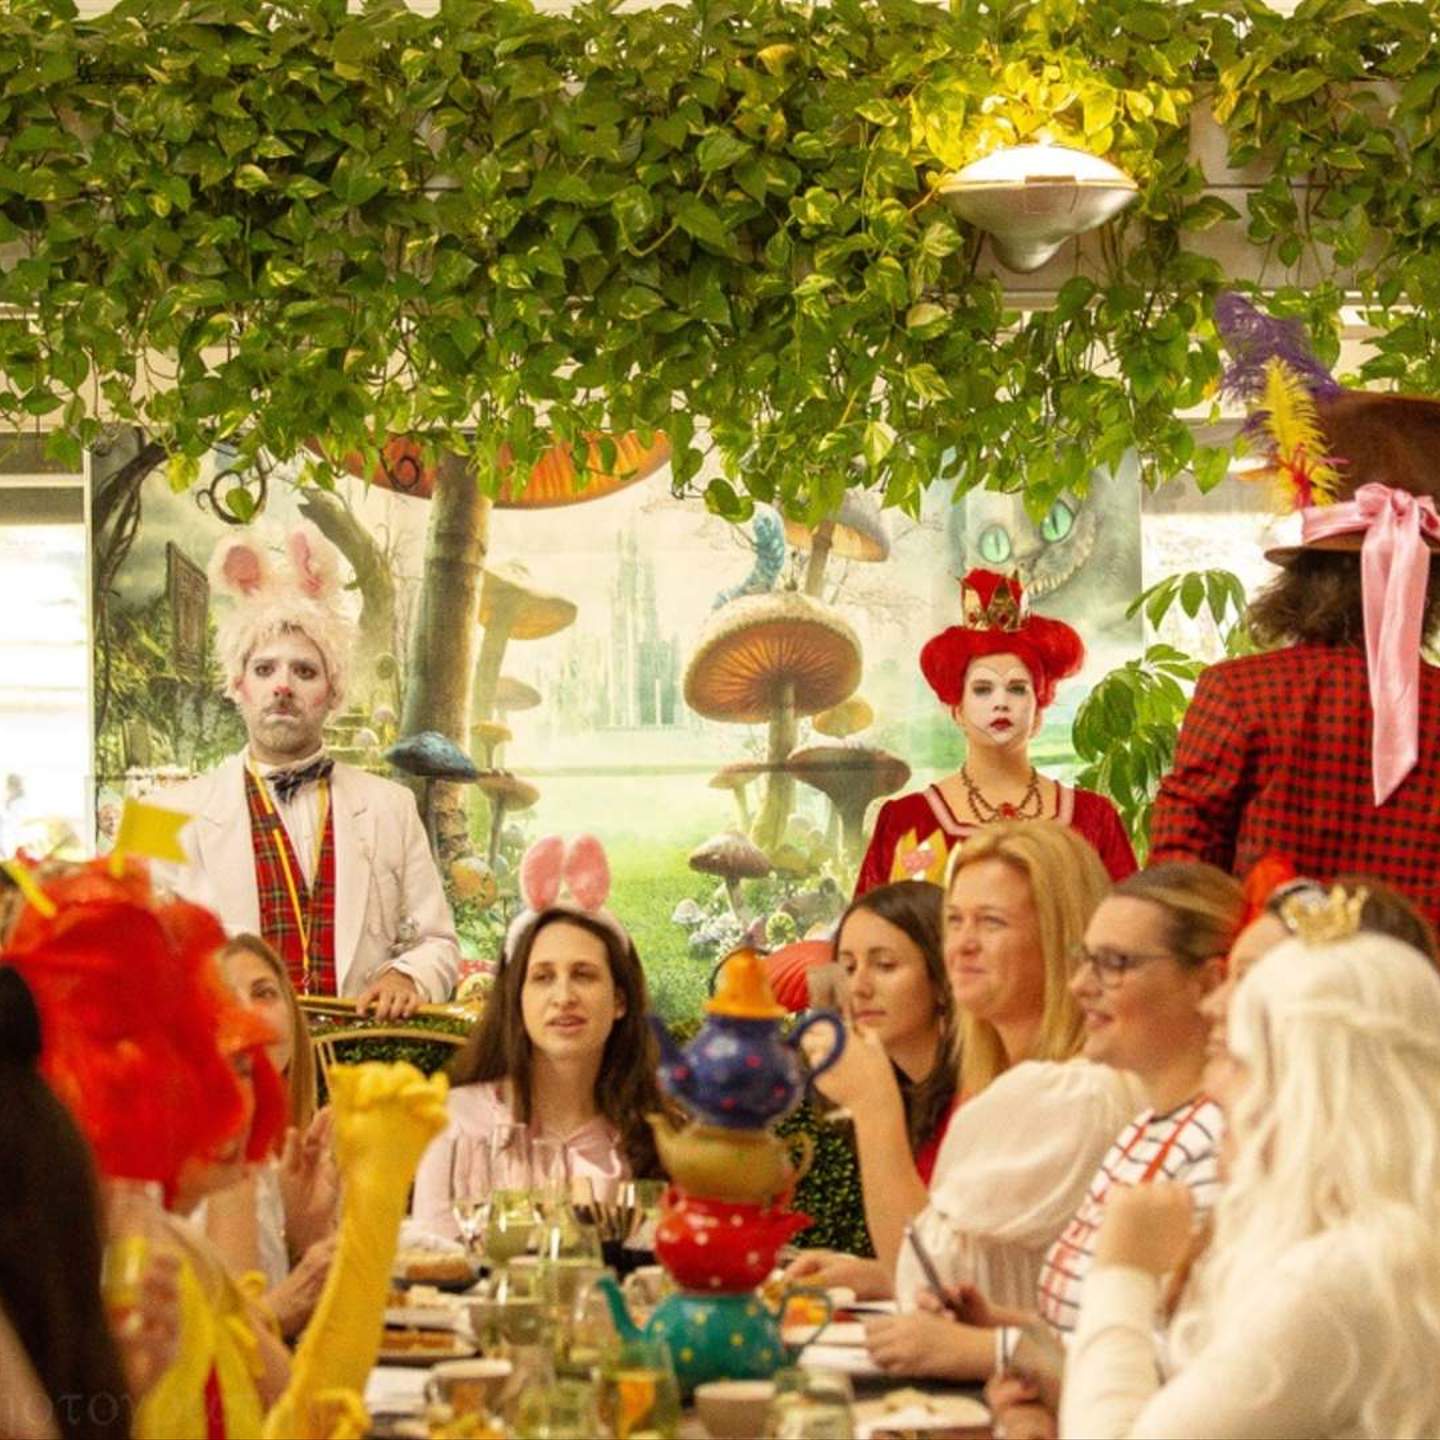 Mad Hatter Dinner Party / Kara S Party Ideas Mad Hatter Tea Party ...